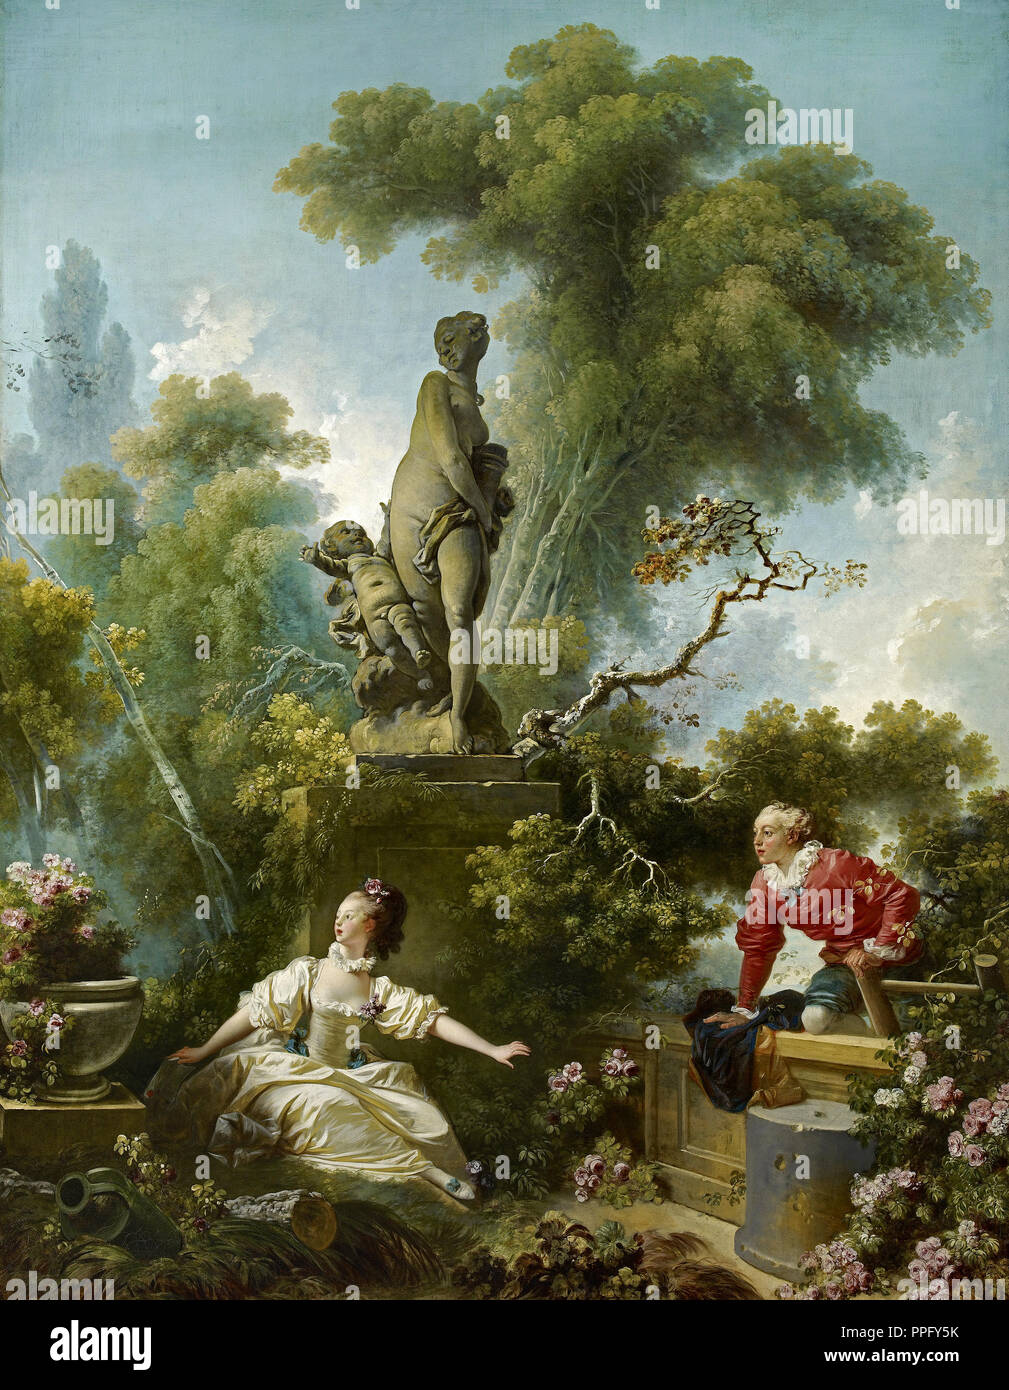 Jean-Honore Fragonard, The Progress of Love: The Meeting. Circa 1771-1773. Oil on canvas. The Frick Collection, New York, USA. Stock Photo